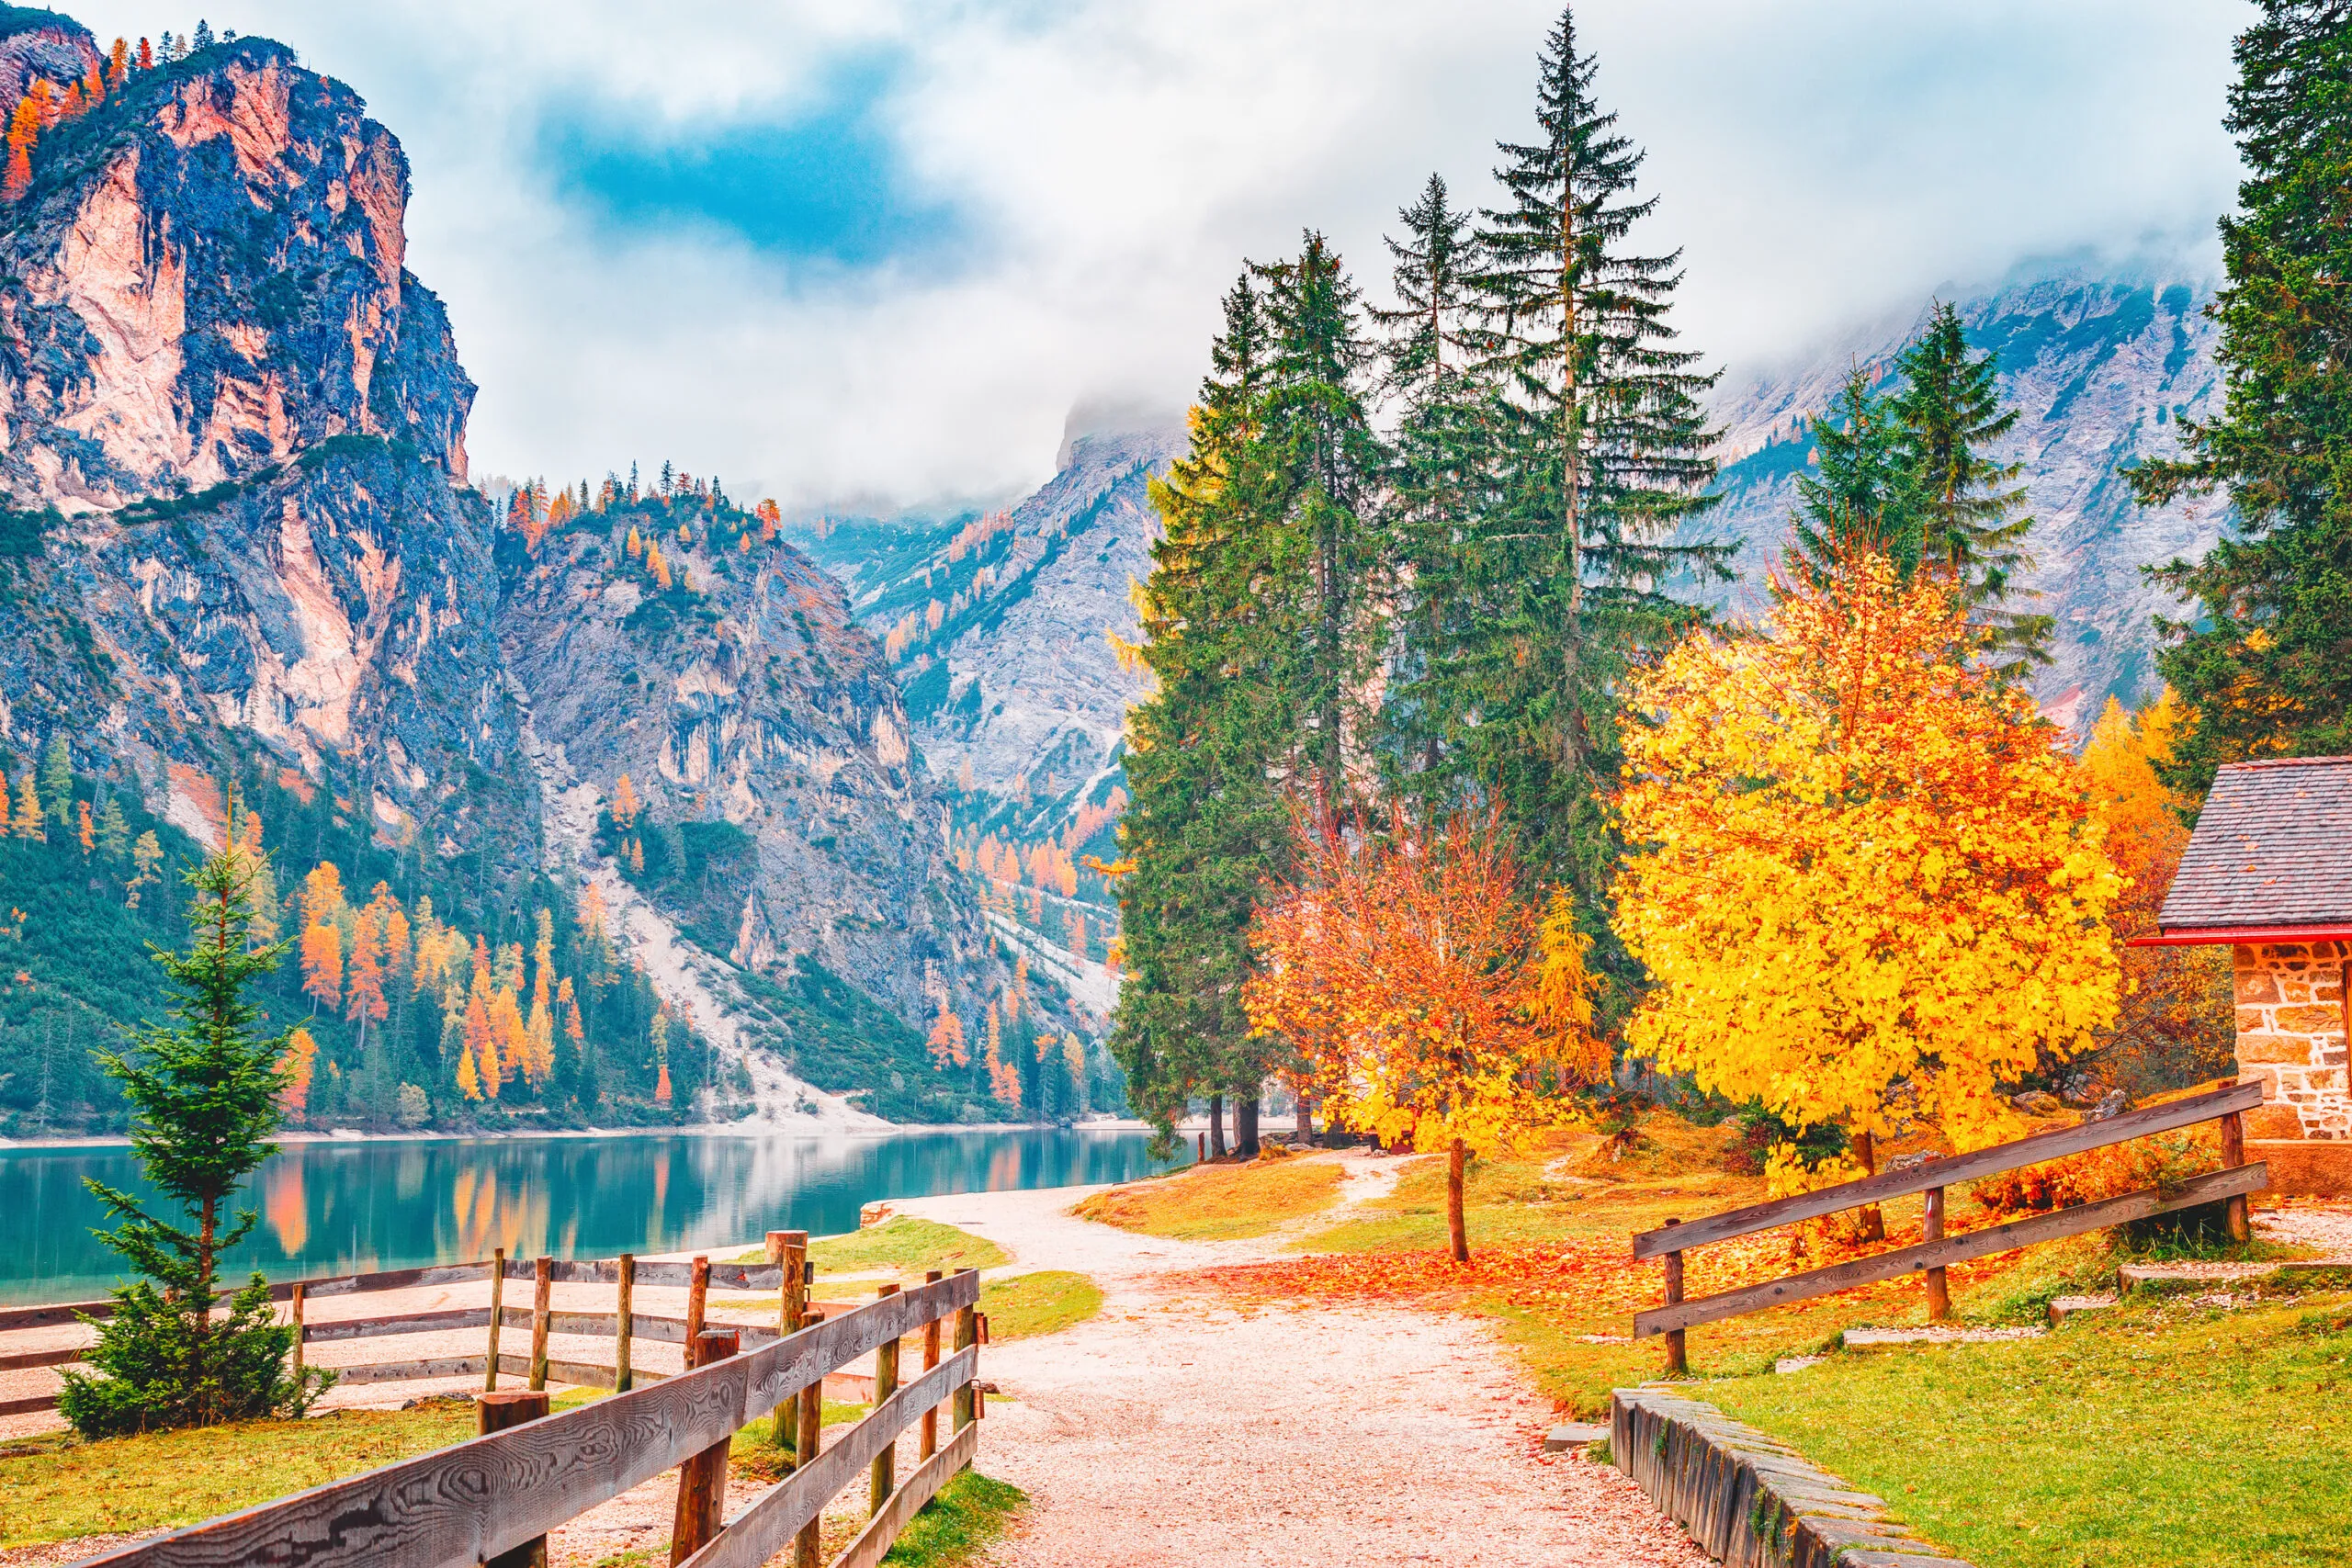 Fall scenery of lake Braies - lago di Braies at Alps background in South Tyrol in Italy. European famous and very popular travel destination. Autumn landscape with yellow leaves trees at bank of lake.